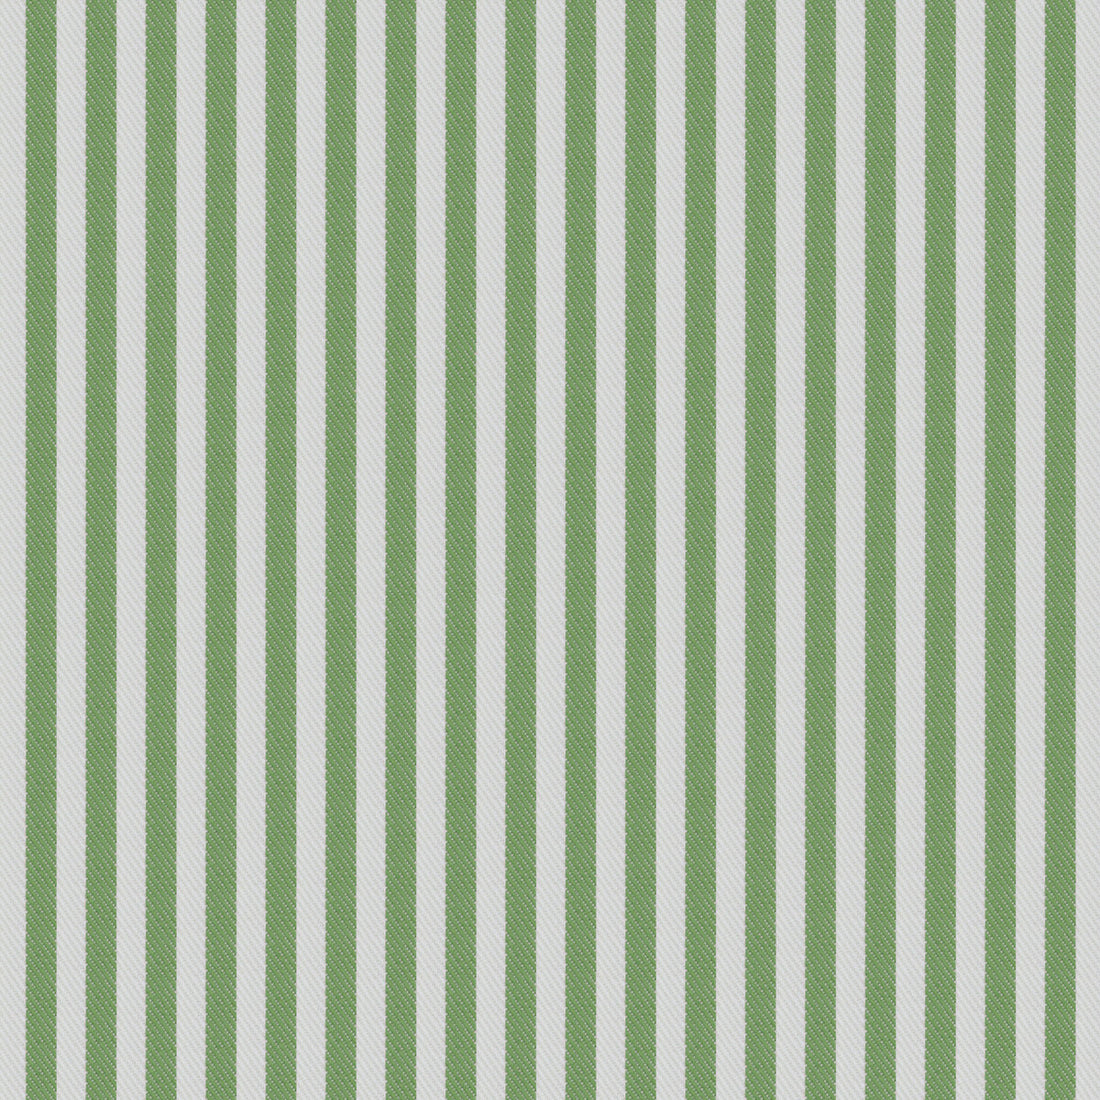 Calobra fabric in verde color - pattern GDT5684.006.0 - by Gaston y Daniela in the Gaston Maiorica collection